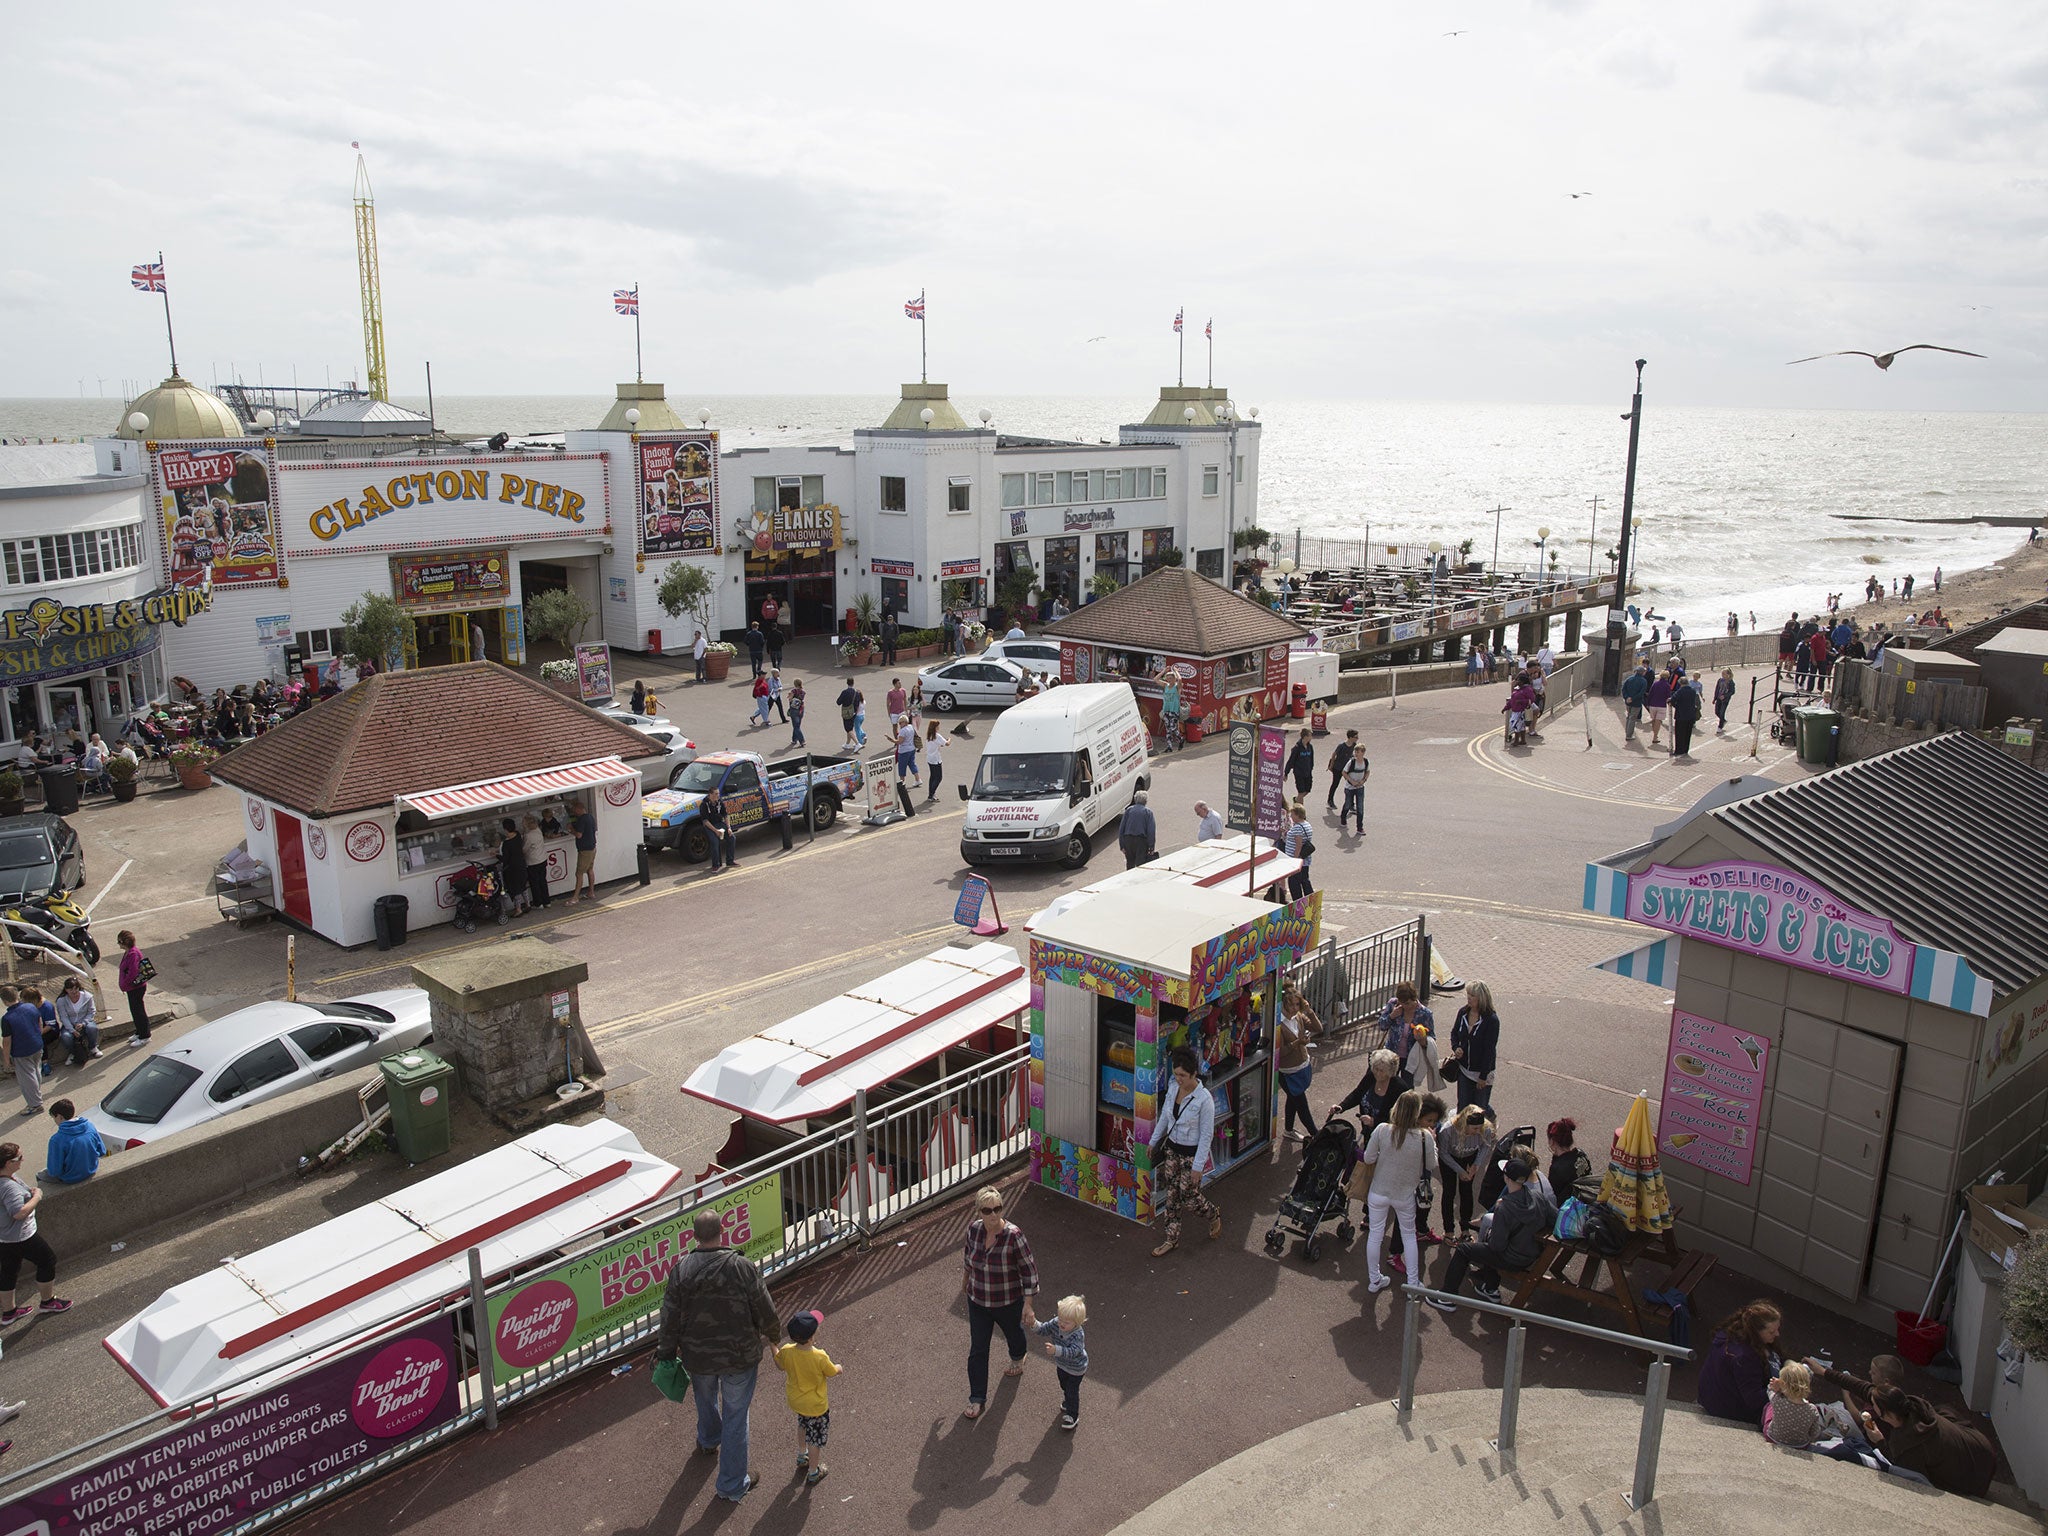 Places like Clacton have been left behind by economic growth